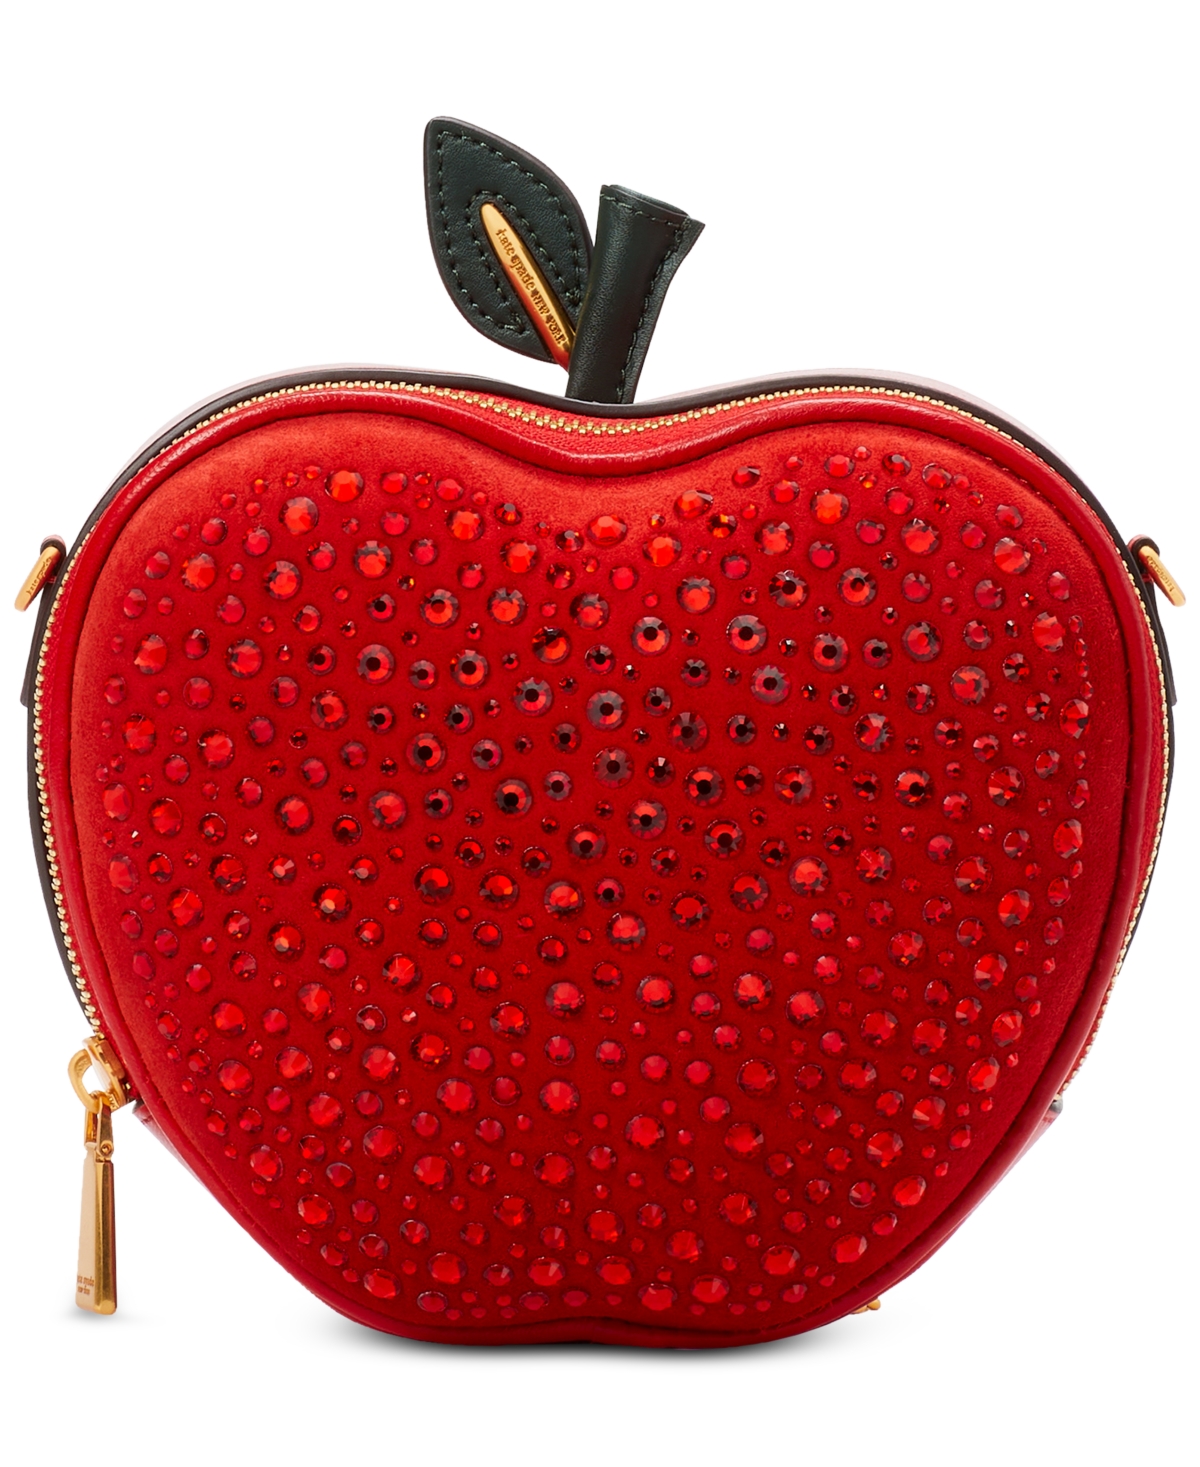 Shop Kate Spade Big Apple Embellished Smooth Leather Crossbody In Poppy Field